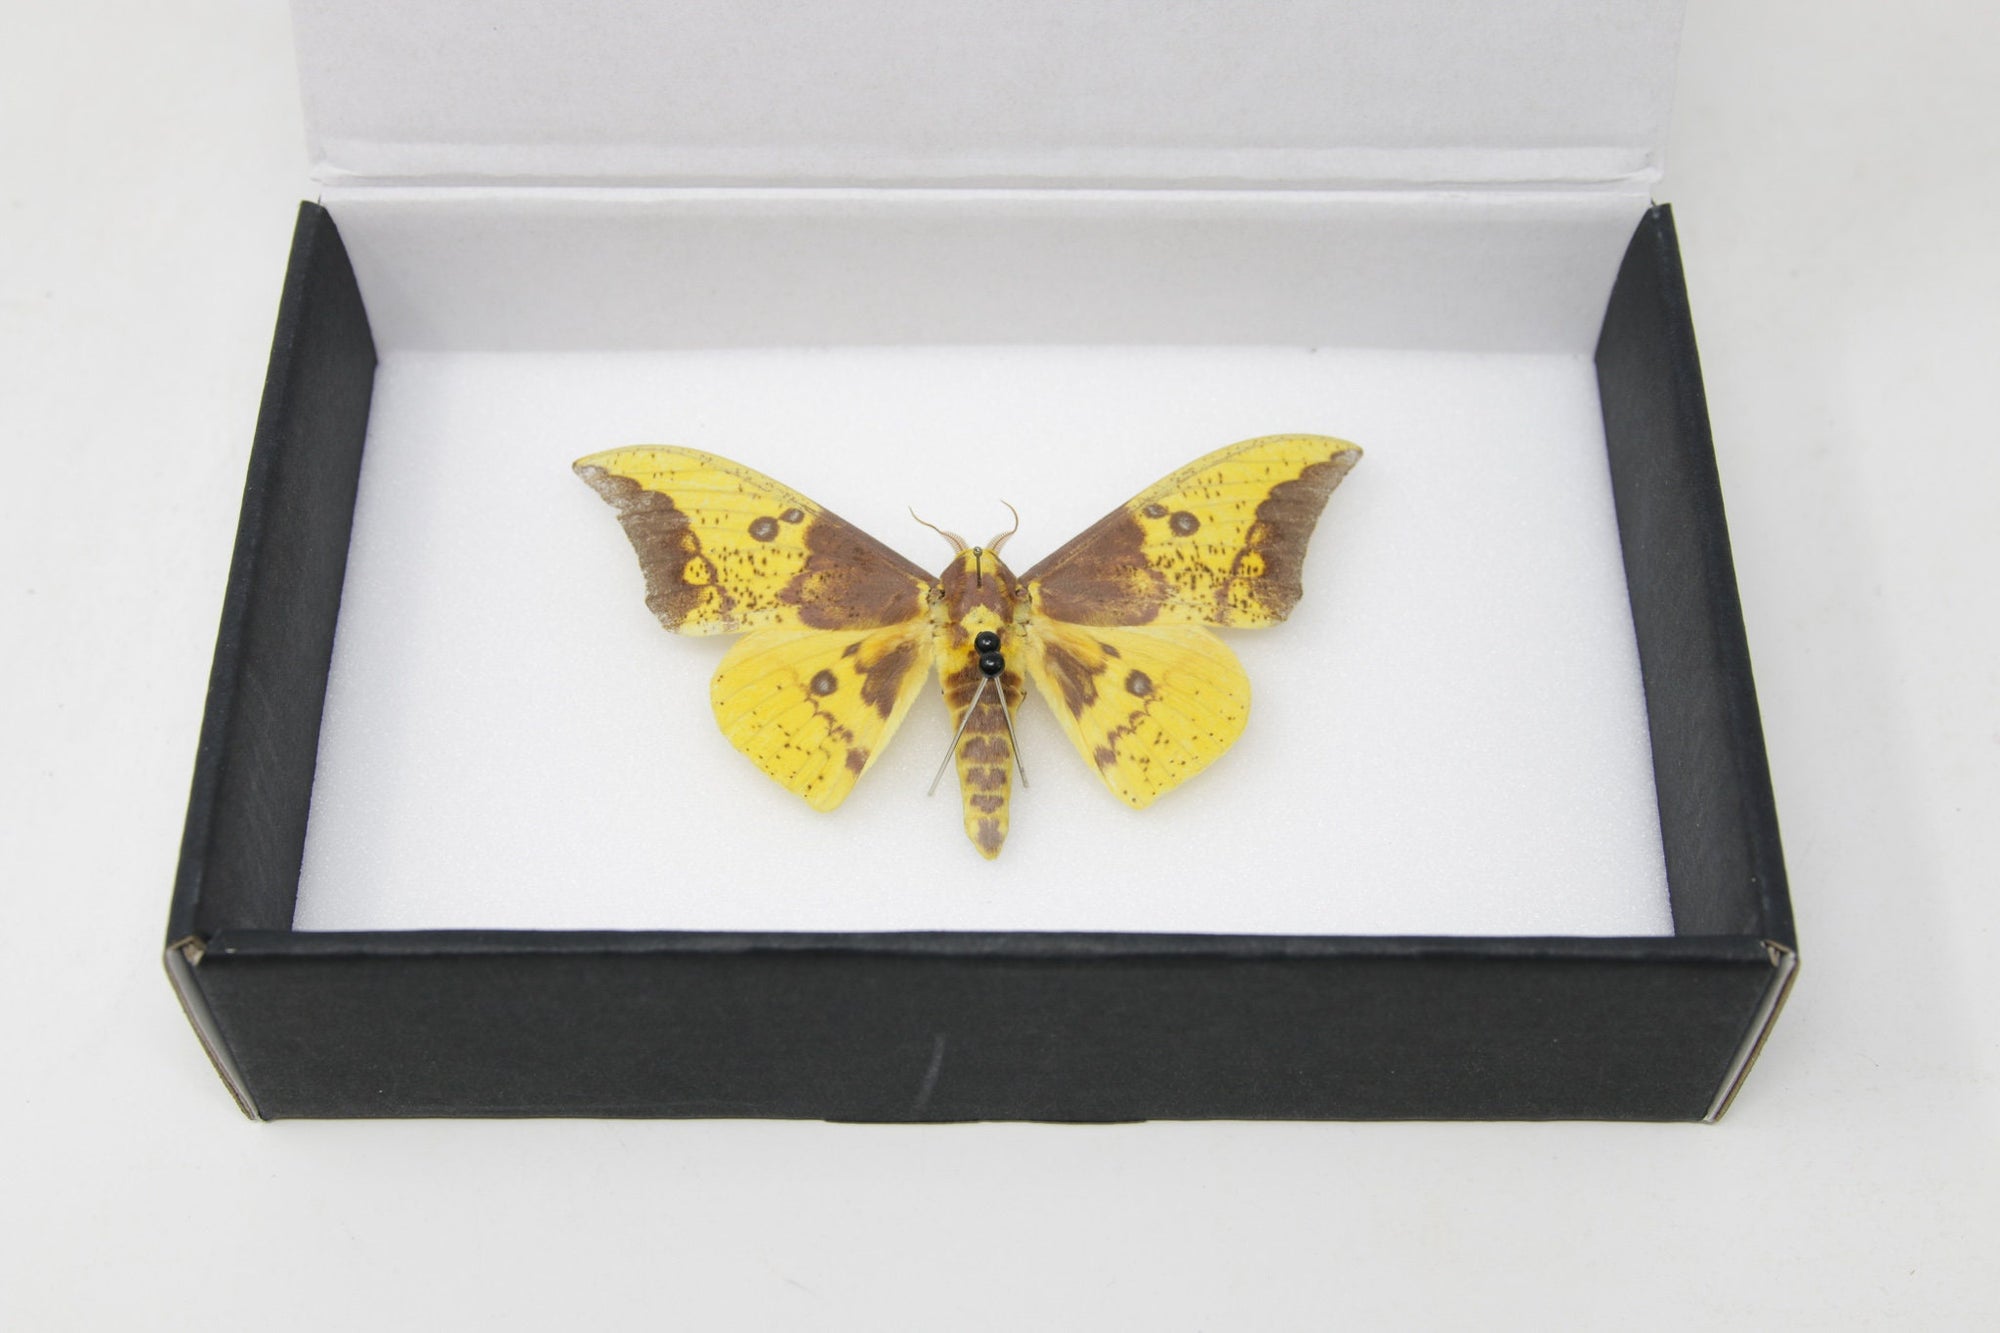 Imperial Silk Moth (Eacles sp.) Entomology Pinned Specimen with Scientific Collection Data